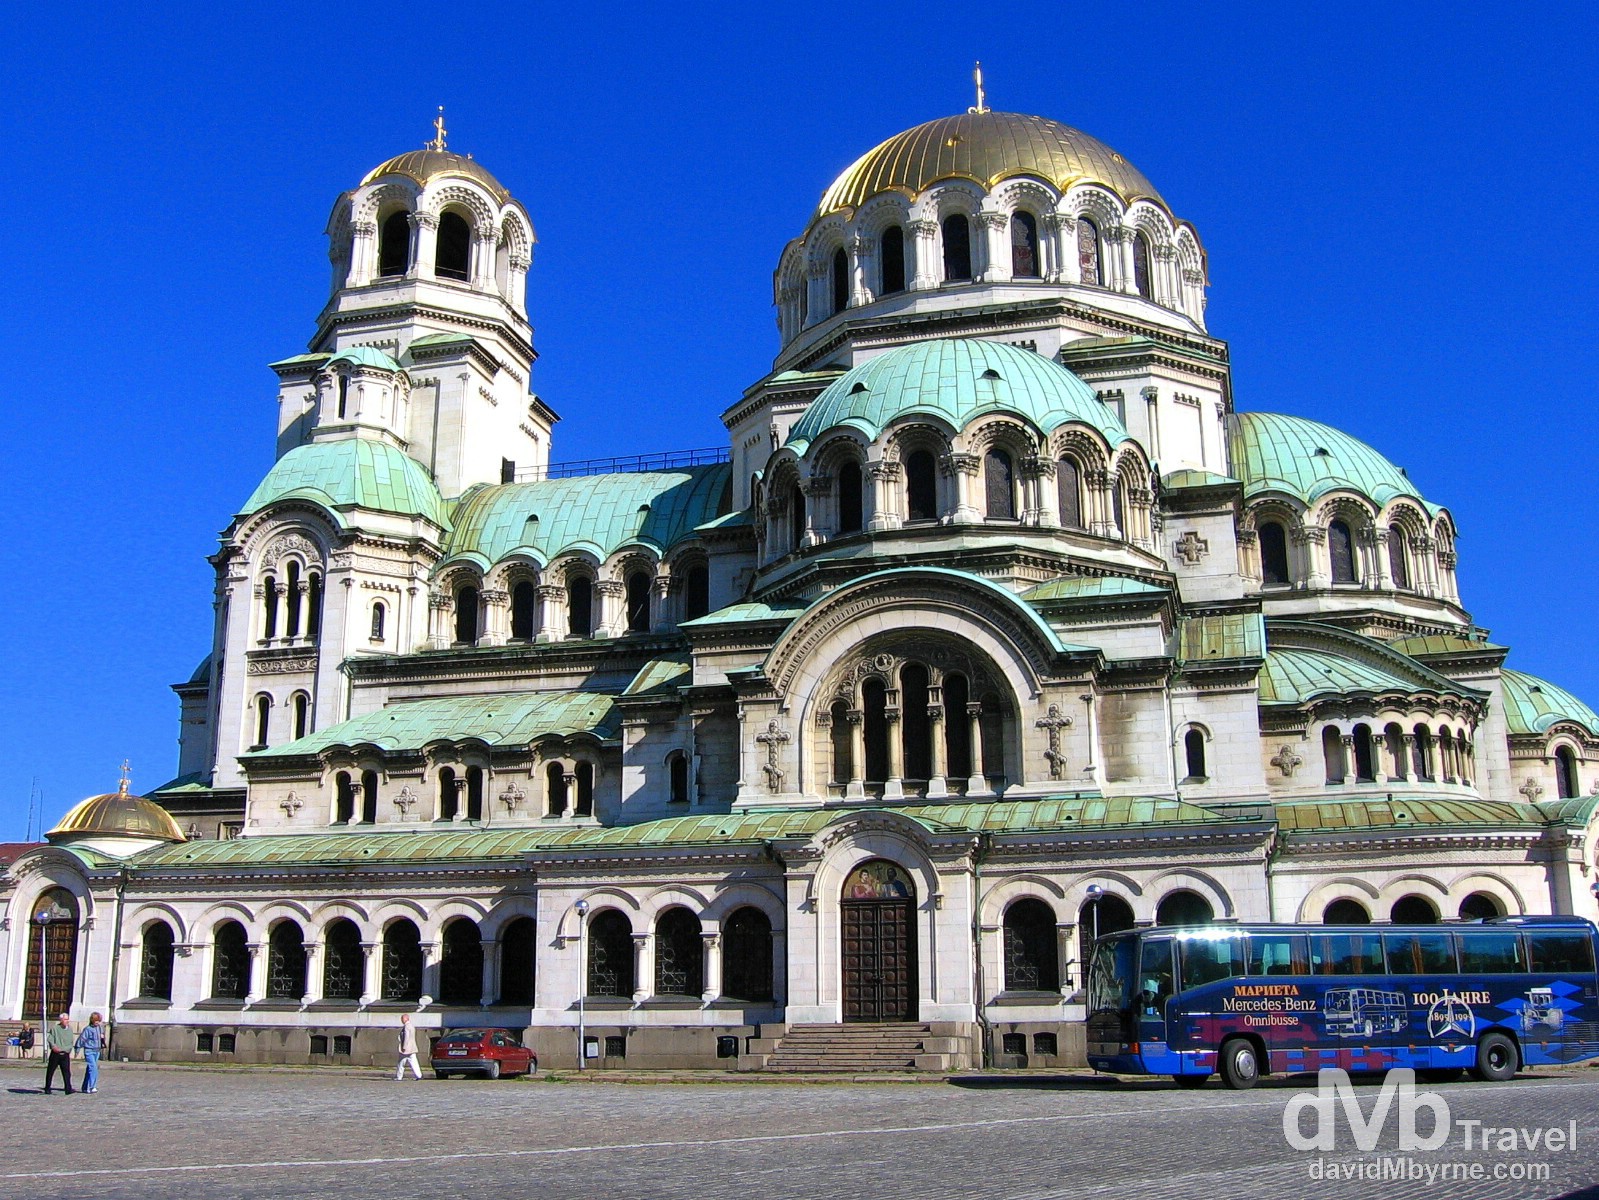 The Alexander Nevsky Cathedral in Sofia, Bulgaria. September 16th, 2007.